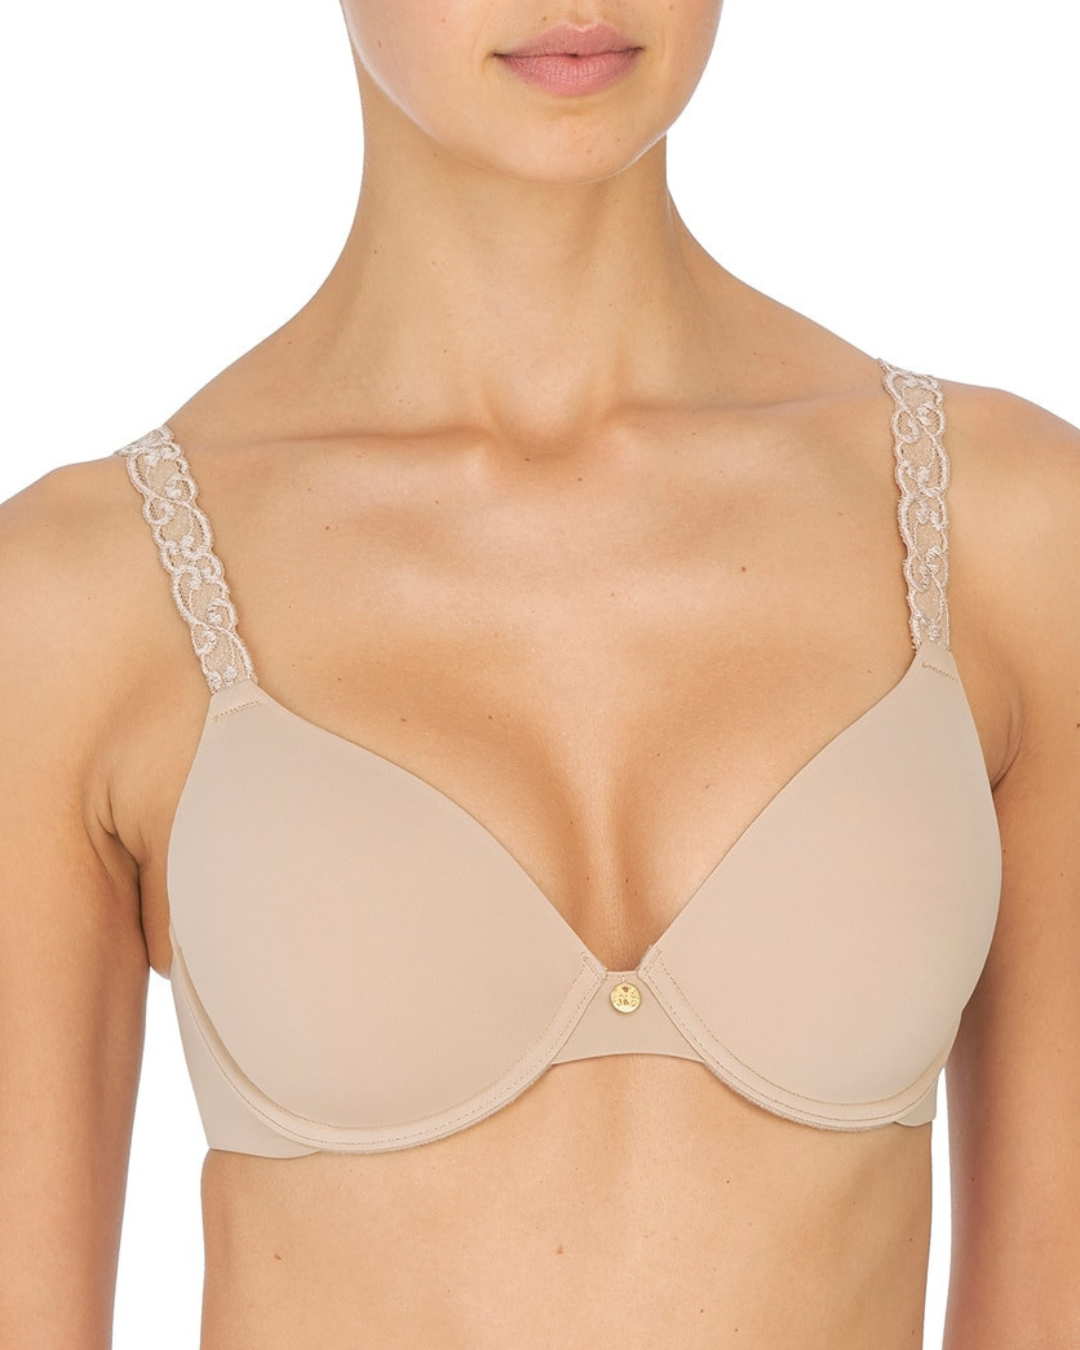 Natori Pure Luxe Molded Underwire Bra (More colors available) - 732080 - Cafe